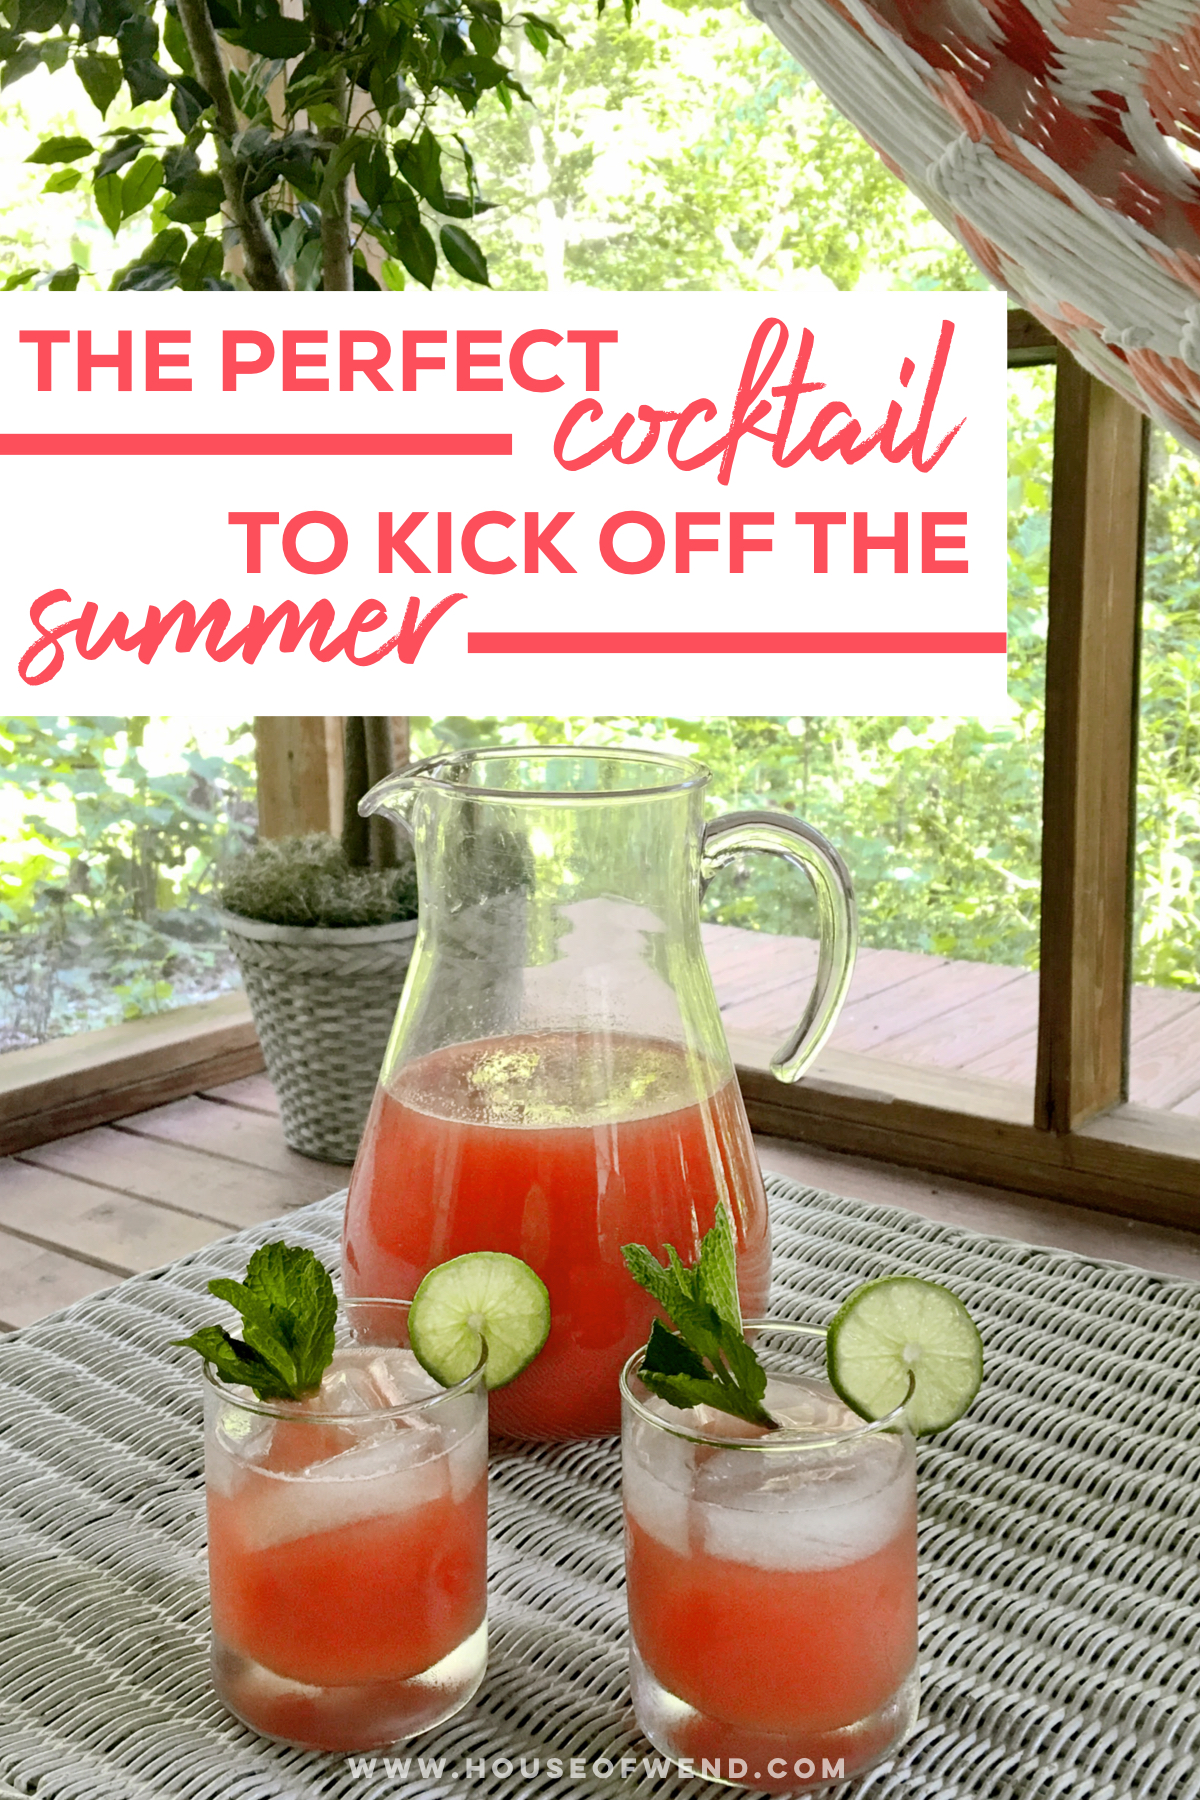 The perfect cocktail to kick off the summer